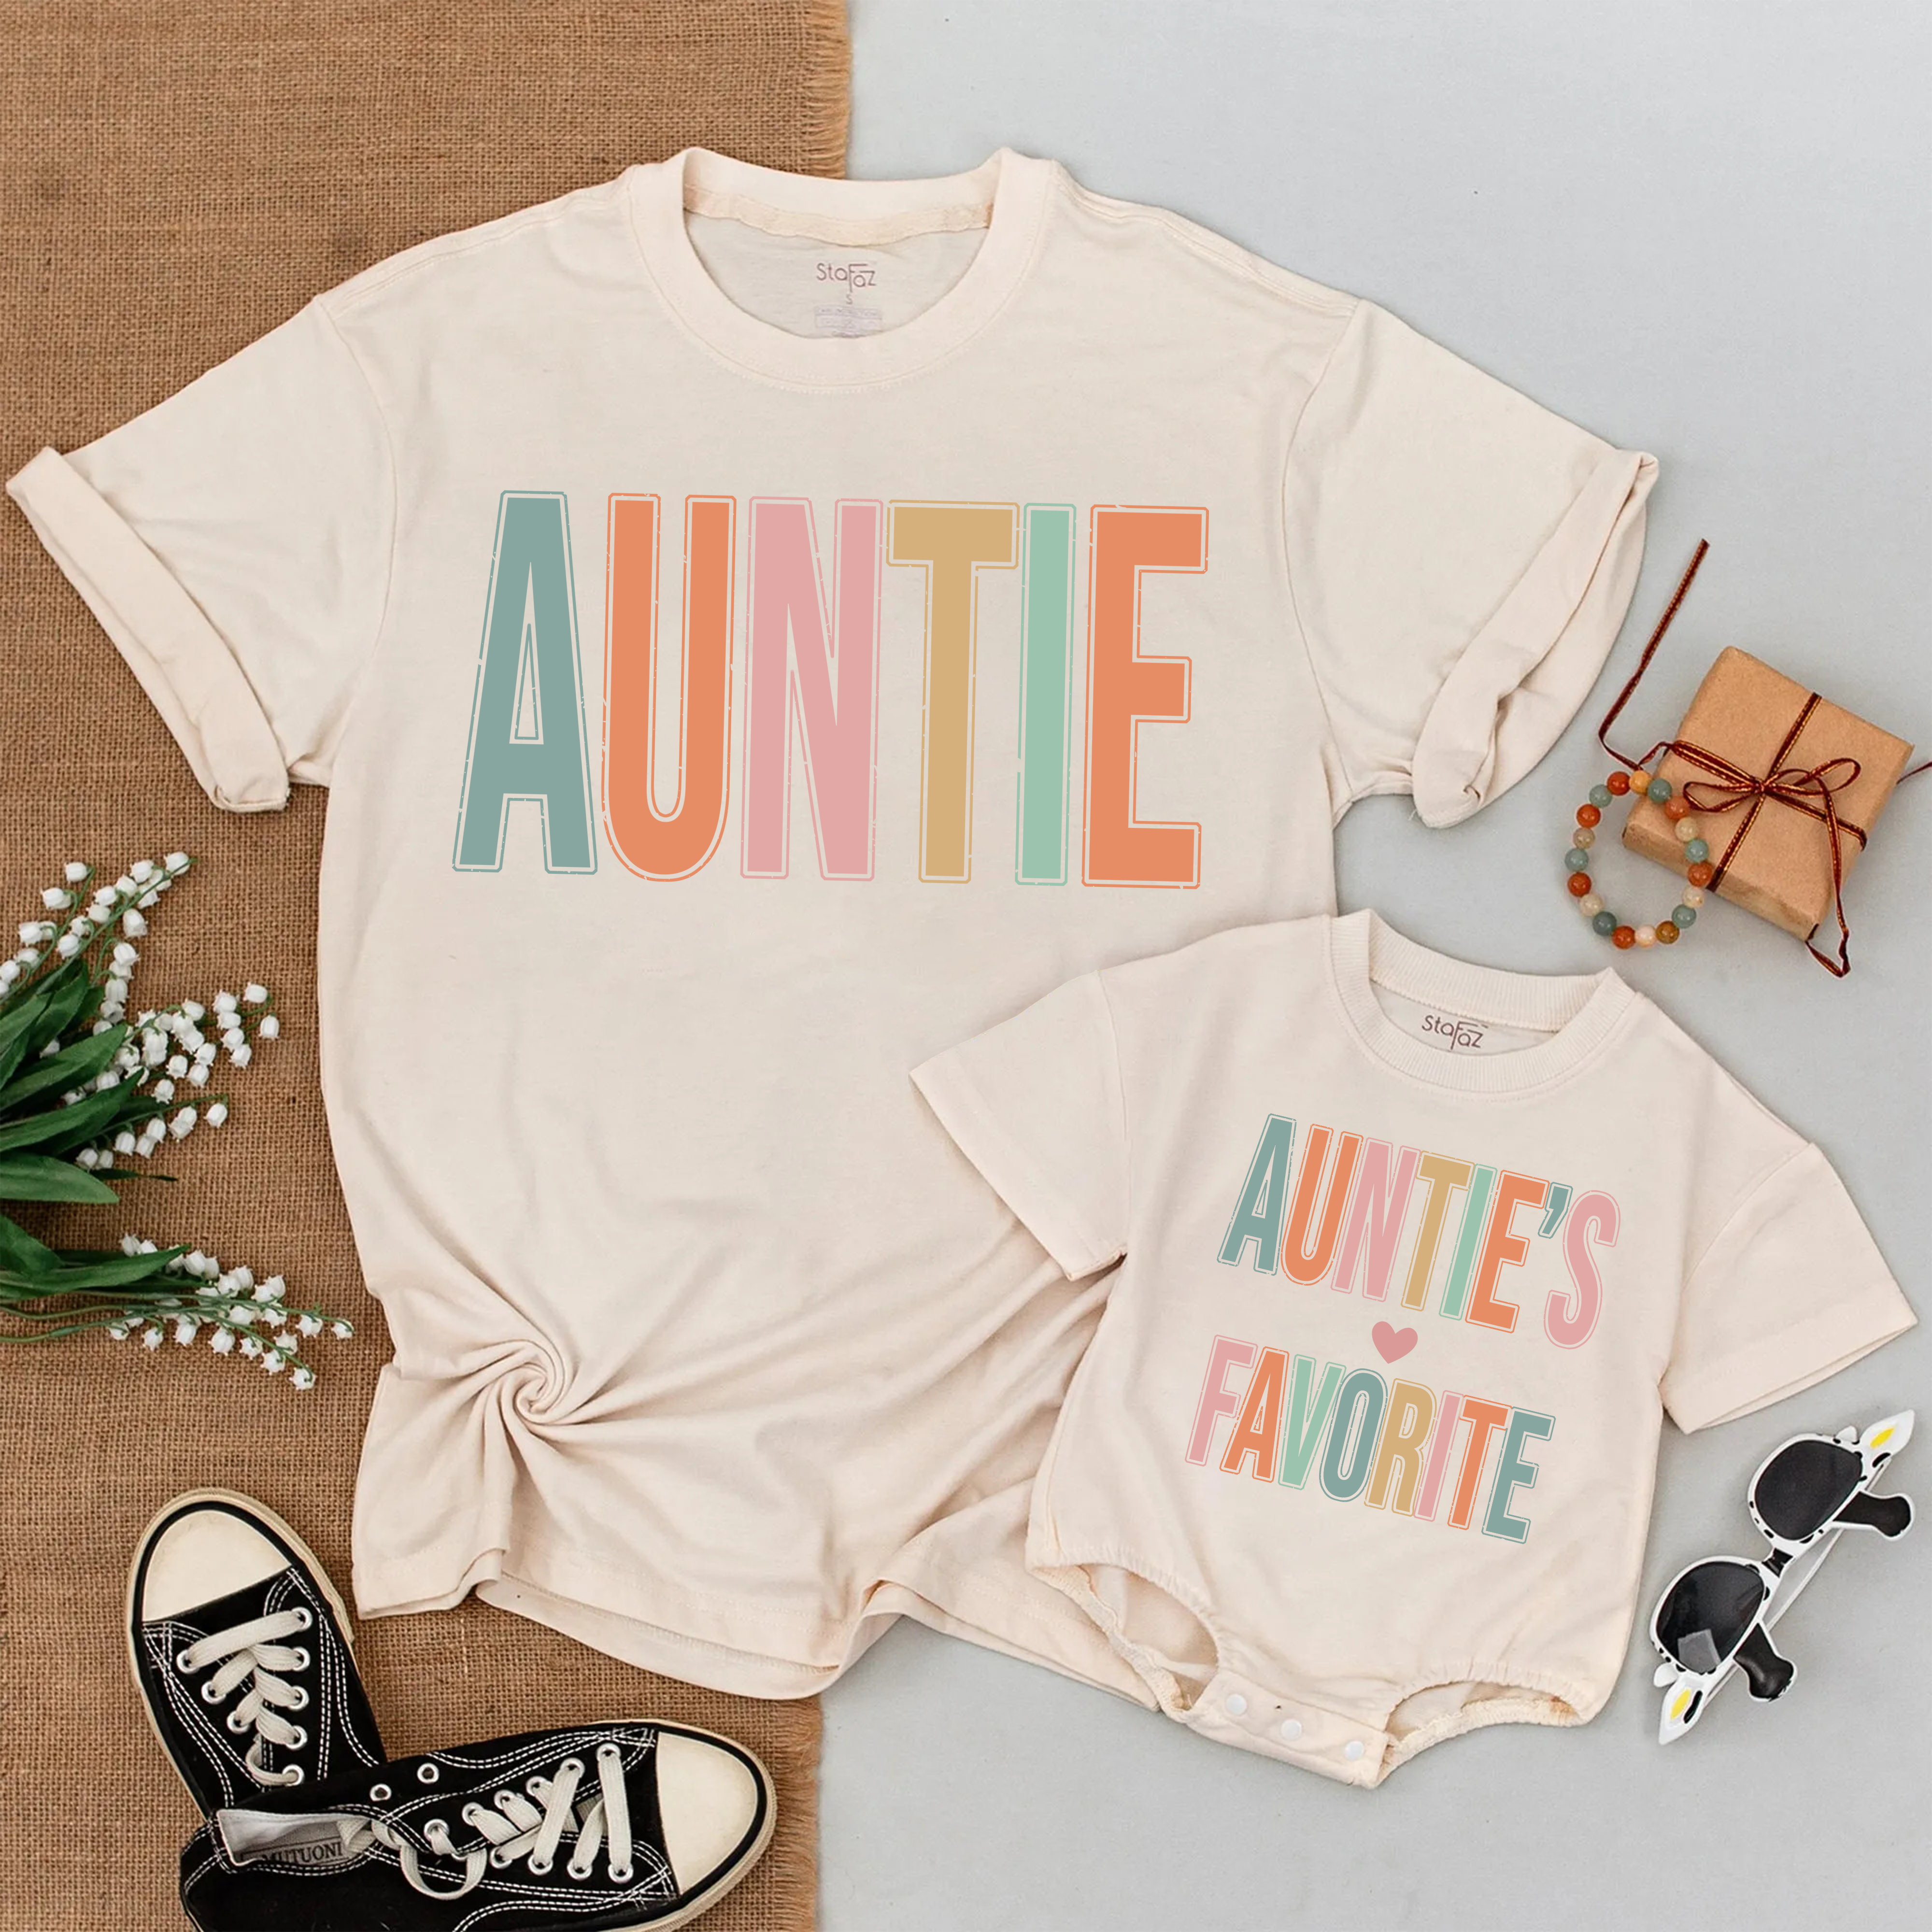 Auntie And Auntie's Favorite Baby Romper Short Sleeve: Matching Family T-Shirt!